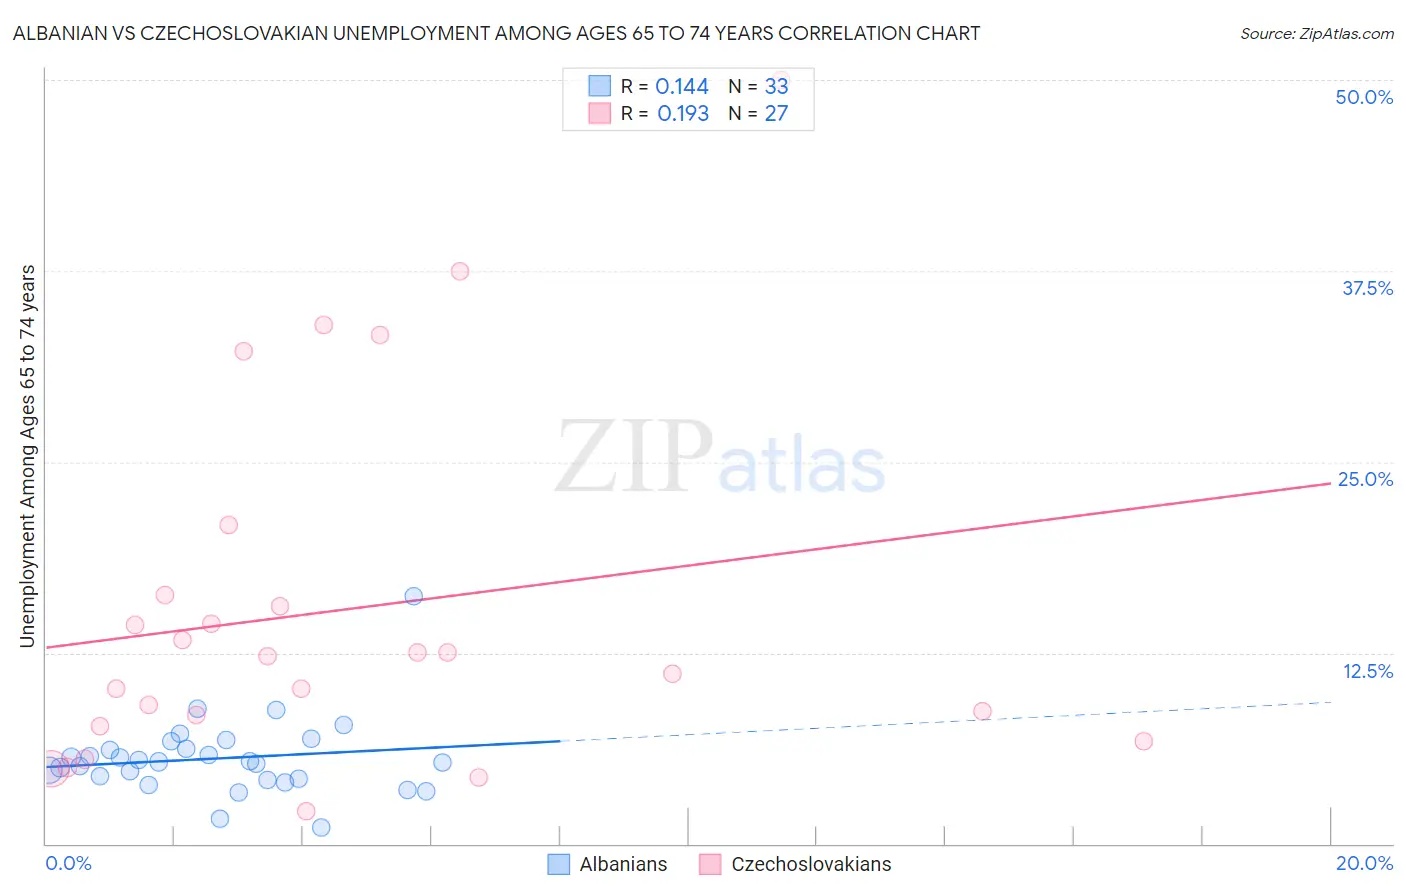 Albanian vs Czechoslovakian Unemployment Among Ages 65 to 74 years